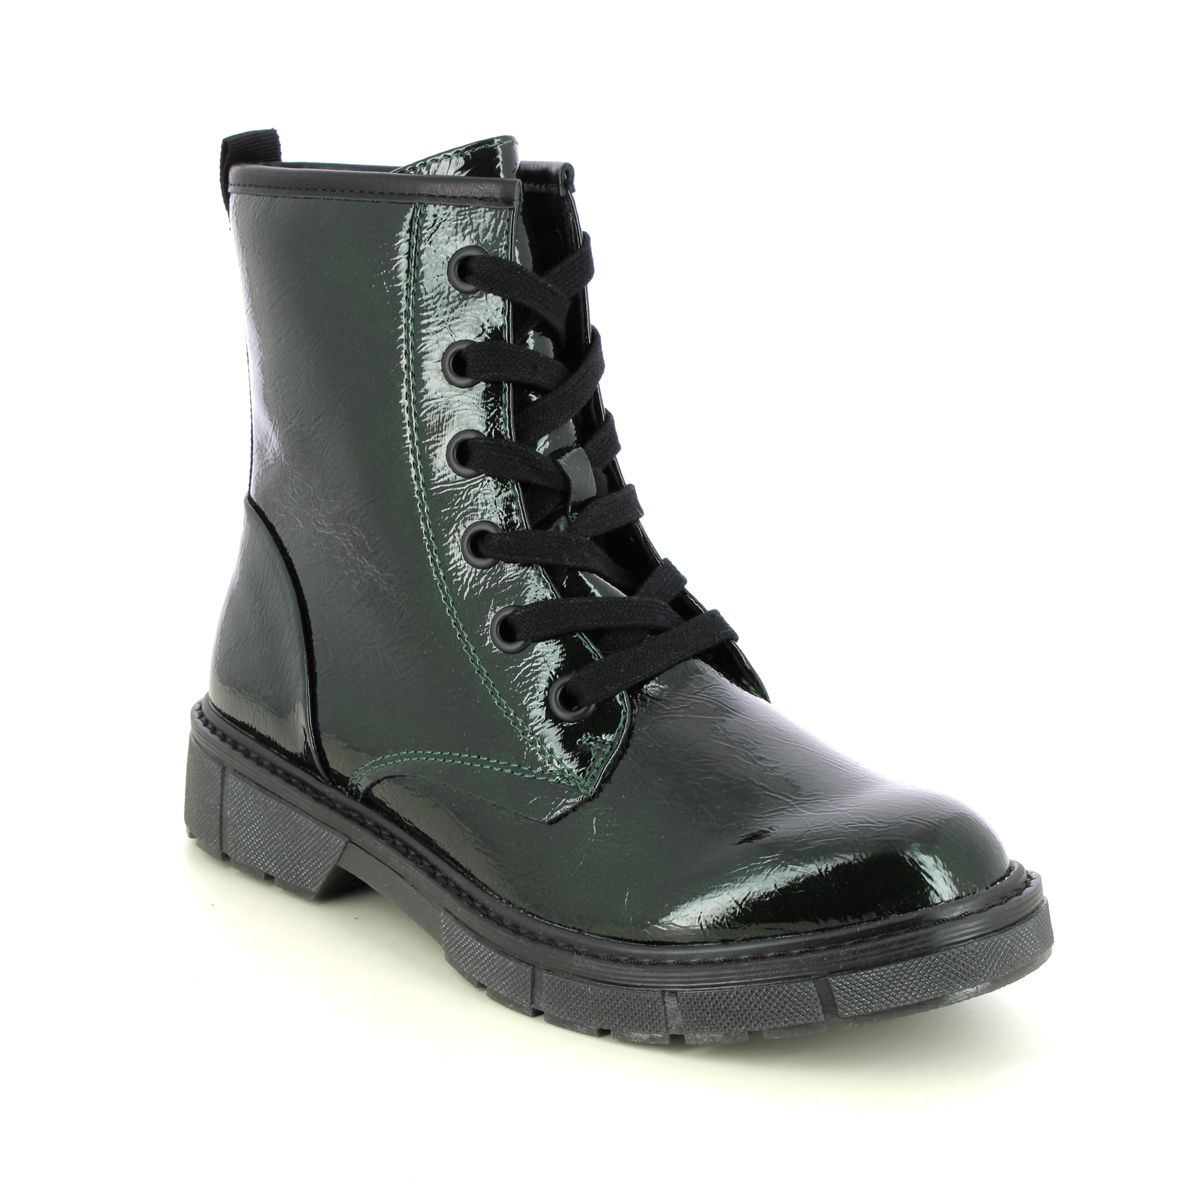 Marco Tozzi Badie  Lace Green Patent Womens Biker Boots 25282-41-789 In Size 41 In Plain Green Patent